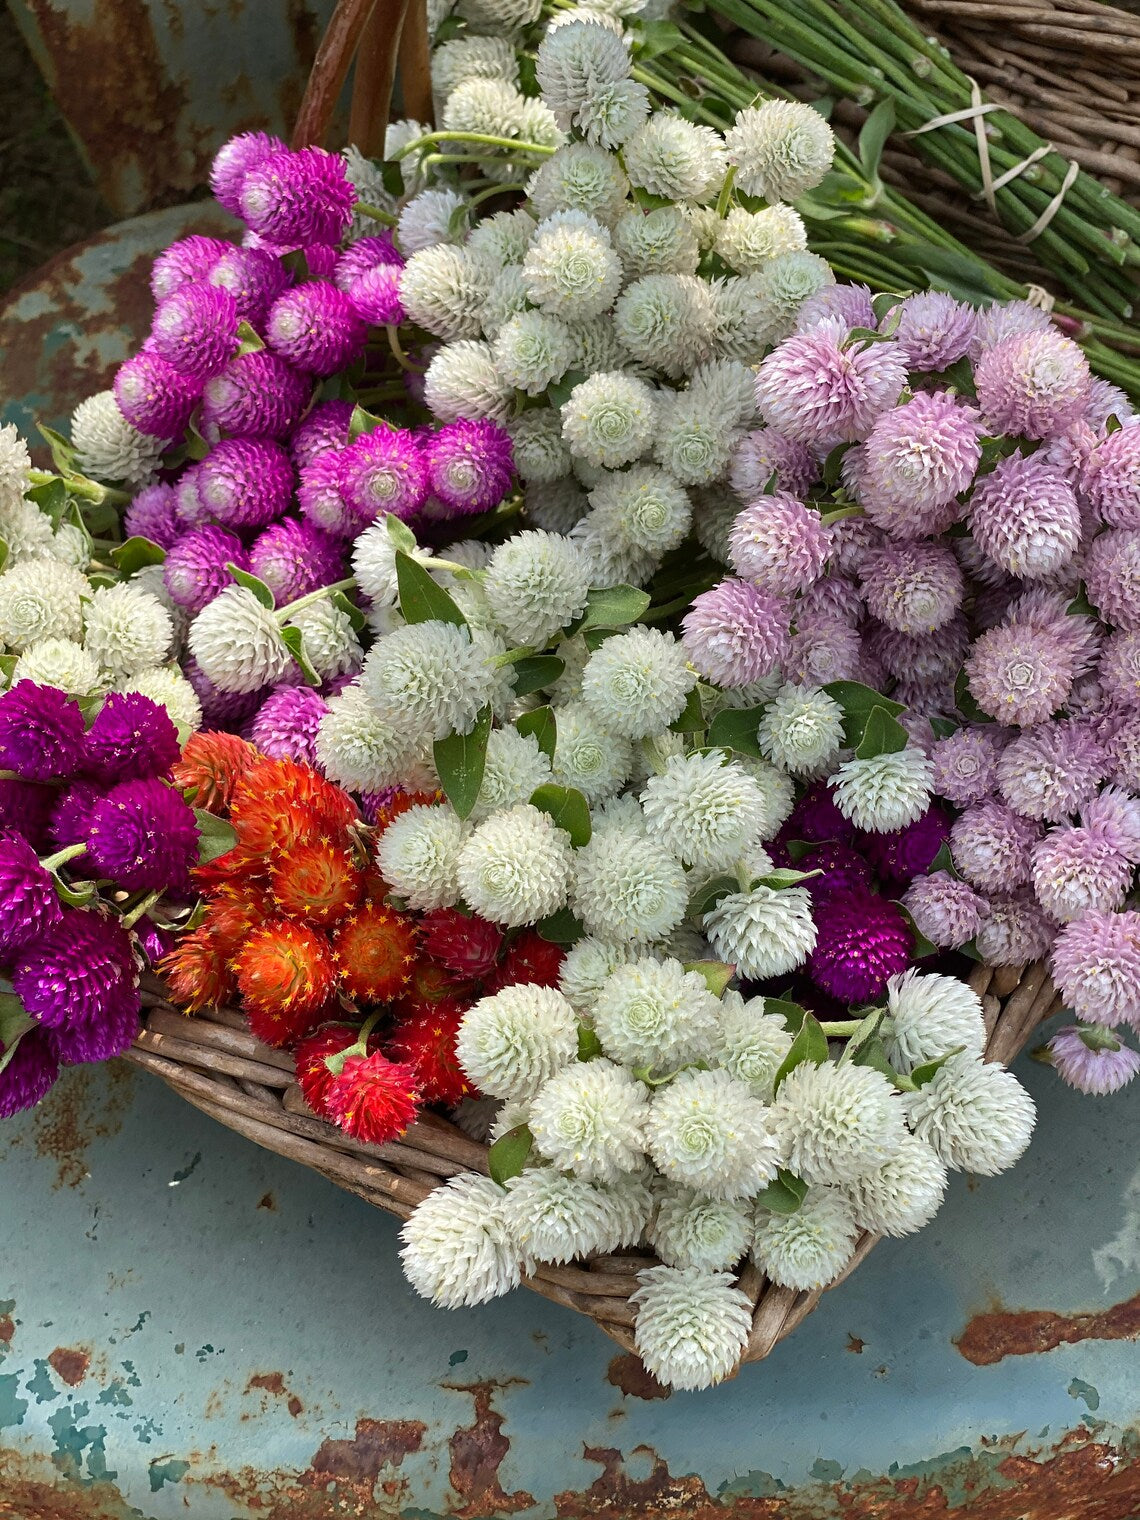 Audray Mix Gomphrena Seeds, Mixed Colors of Globe Amaranth, Great for Fresh or Dried Florals